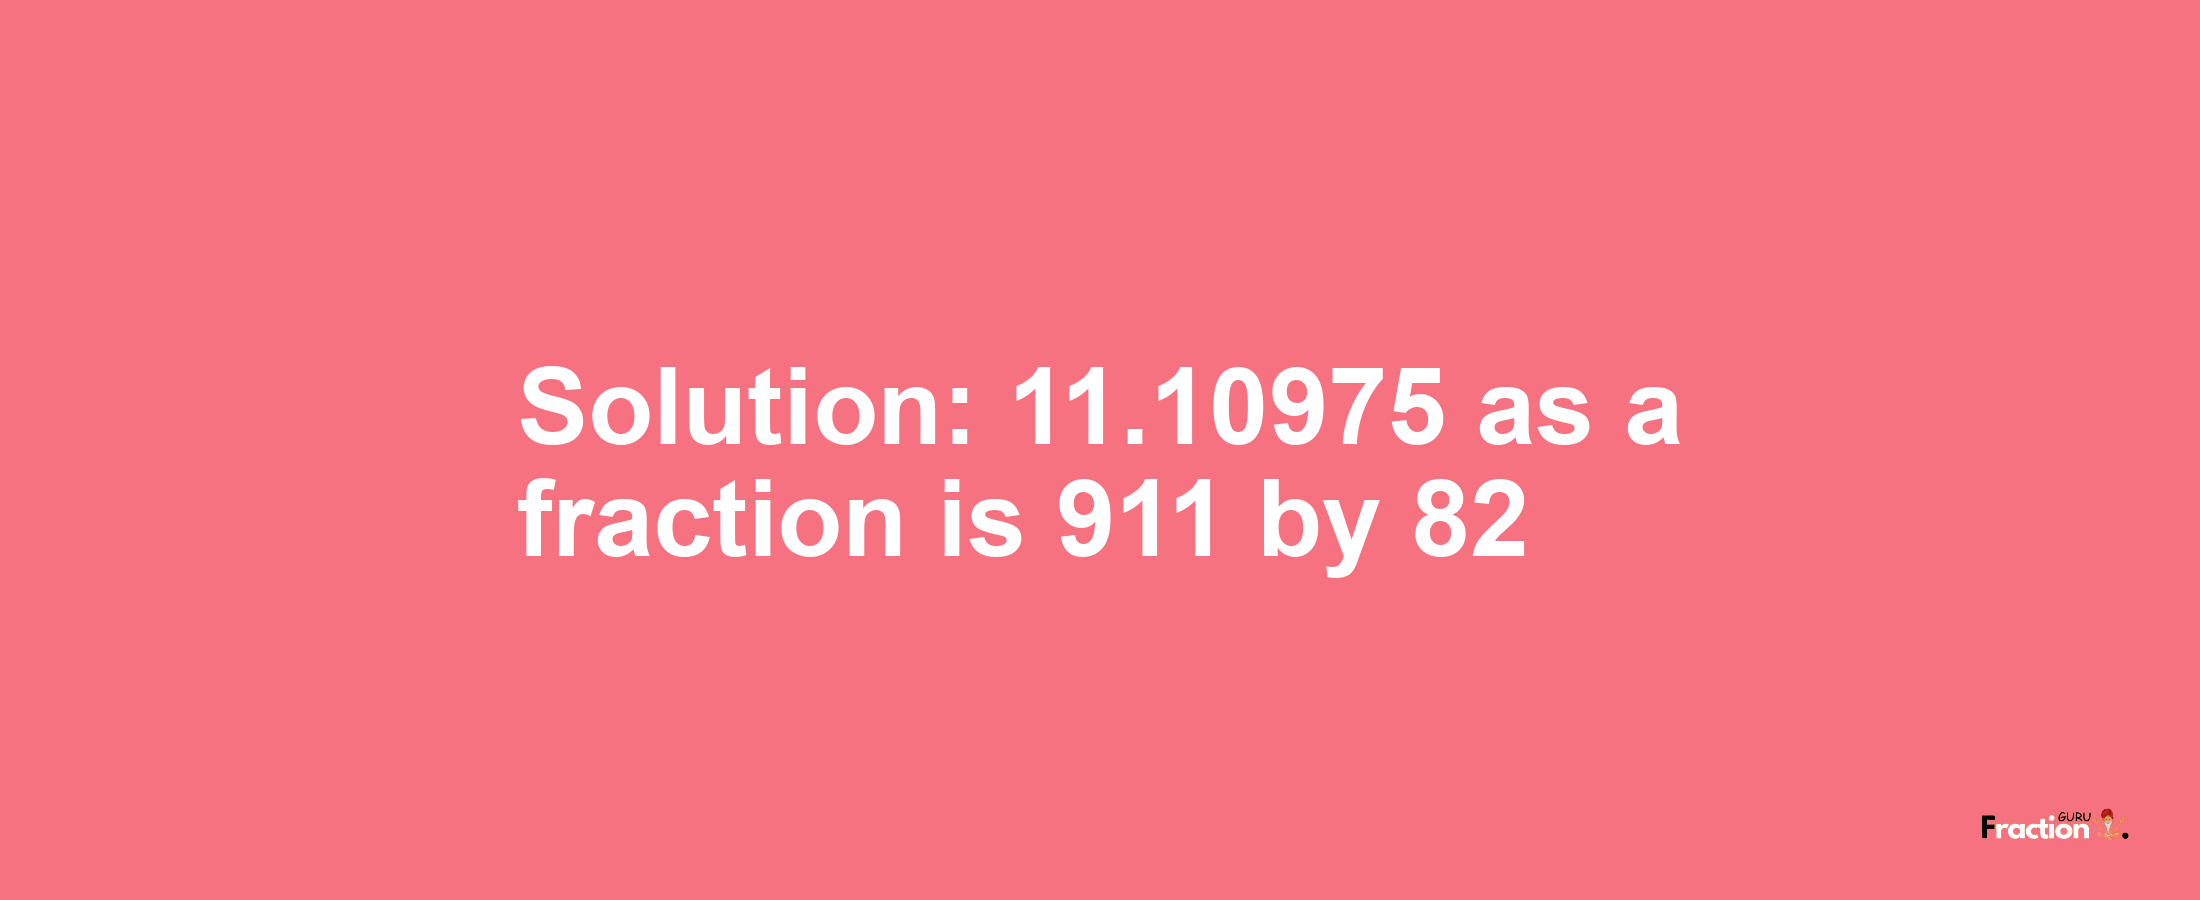 Solution:11.10975 as a fraction is 911/82